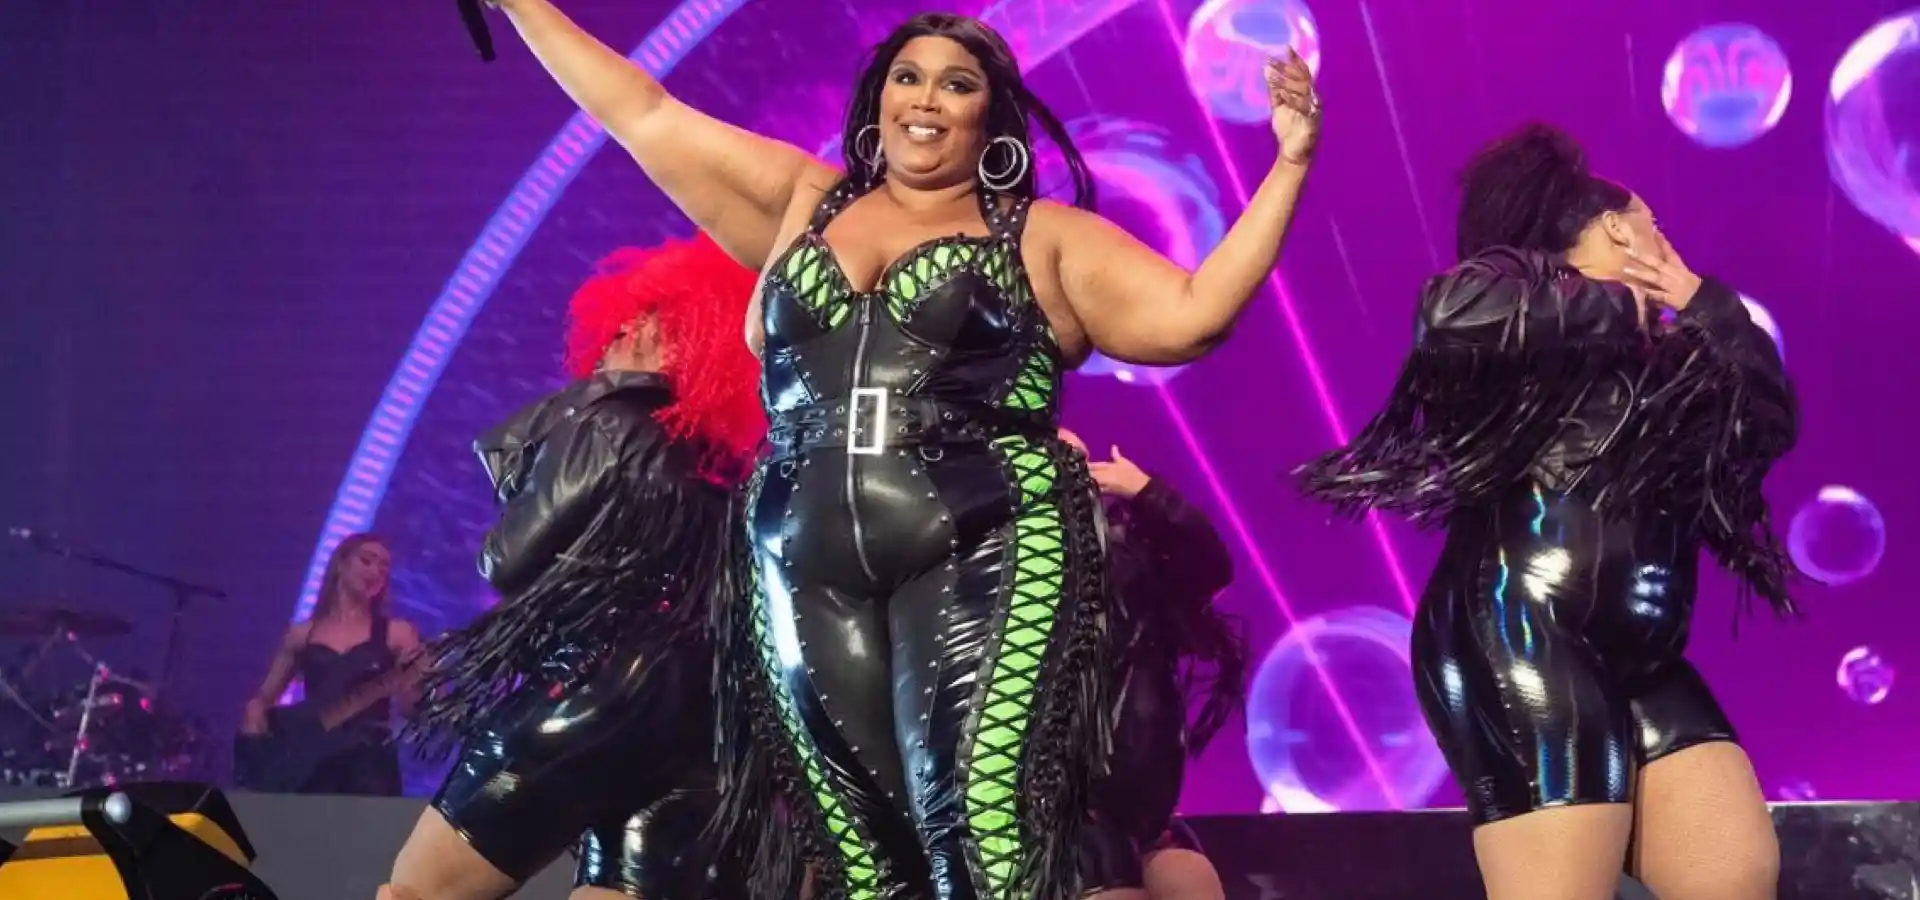 Former Tour Dancers Accuse Lizzo of Hostile Work Environment and Sexual Harassment in Troubling Legal Battle webs